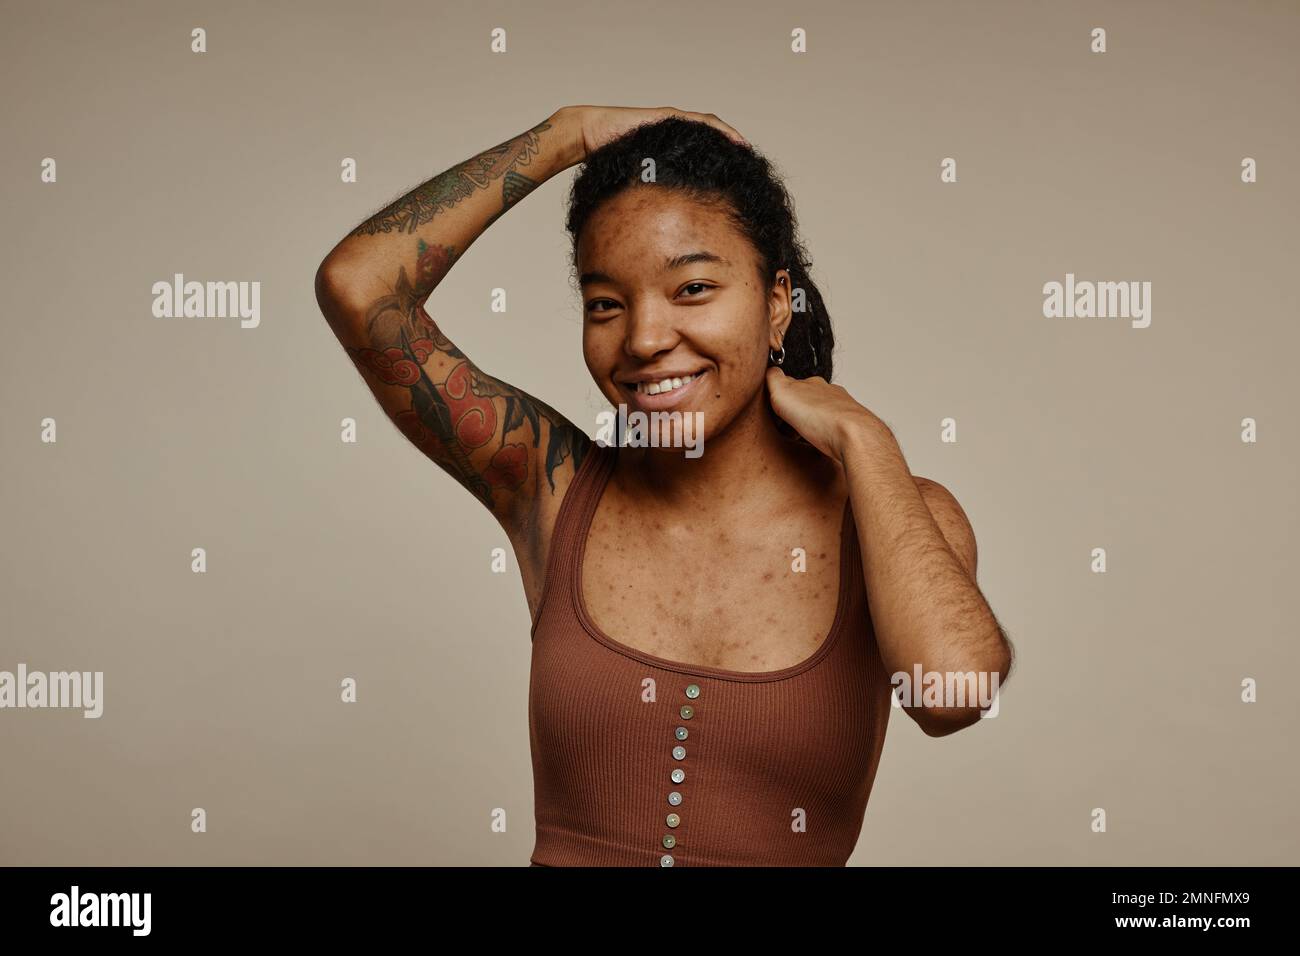 Candid portrait of ethnic young woman with tattoos looking at camera against neutral beige background, copy space Stock Photo